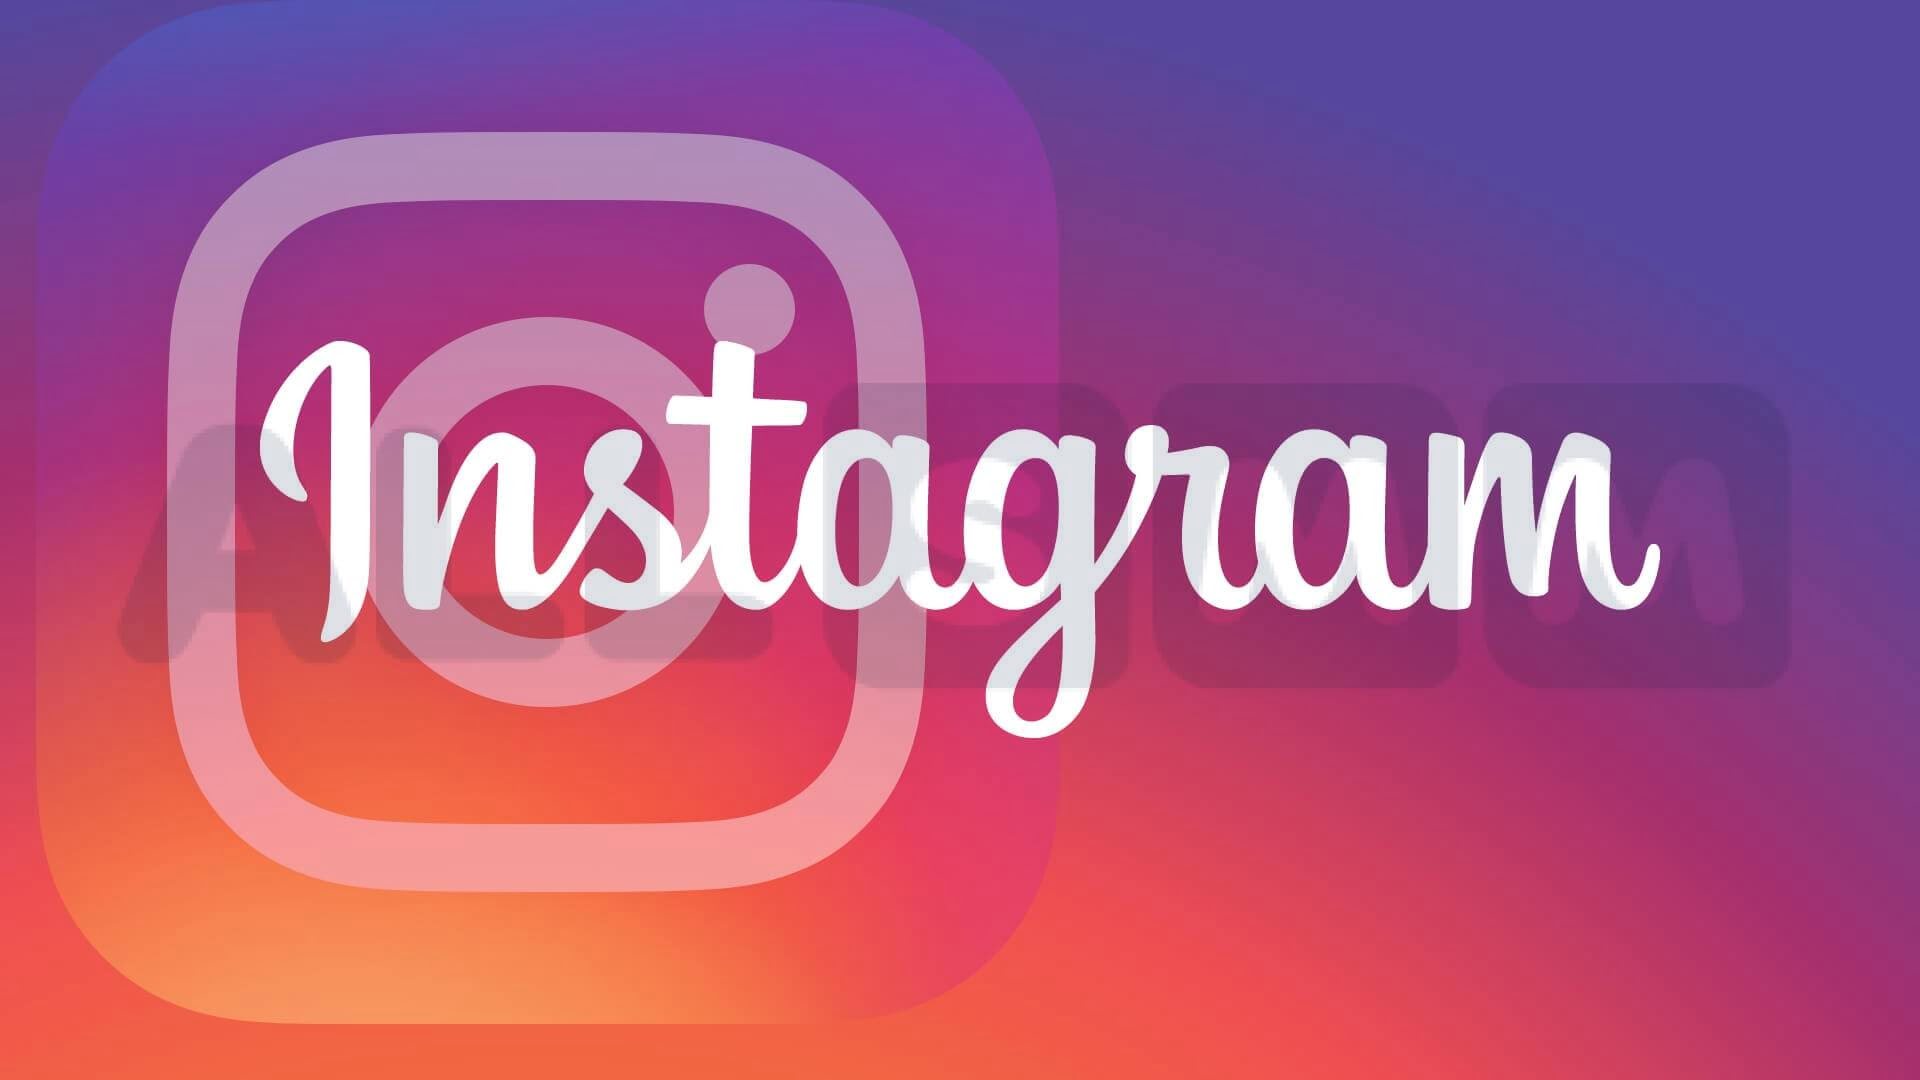 Promotion of an Instagram Furniture Store